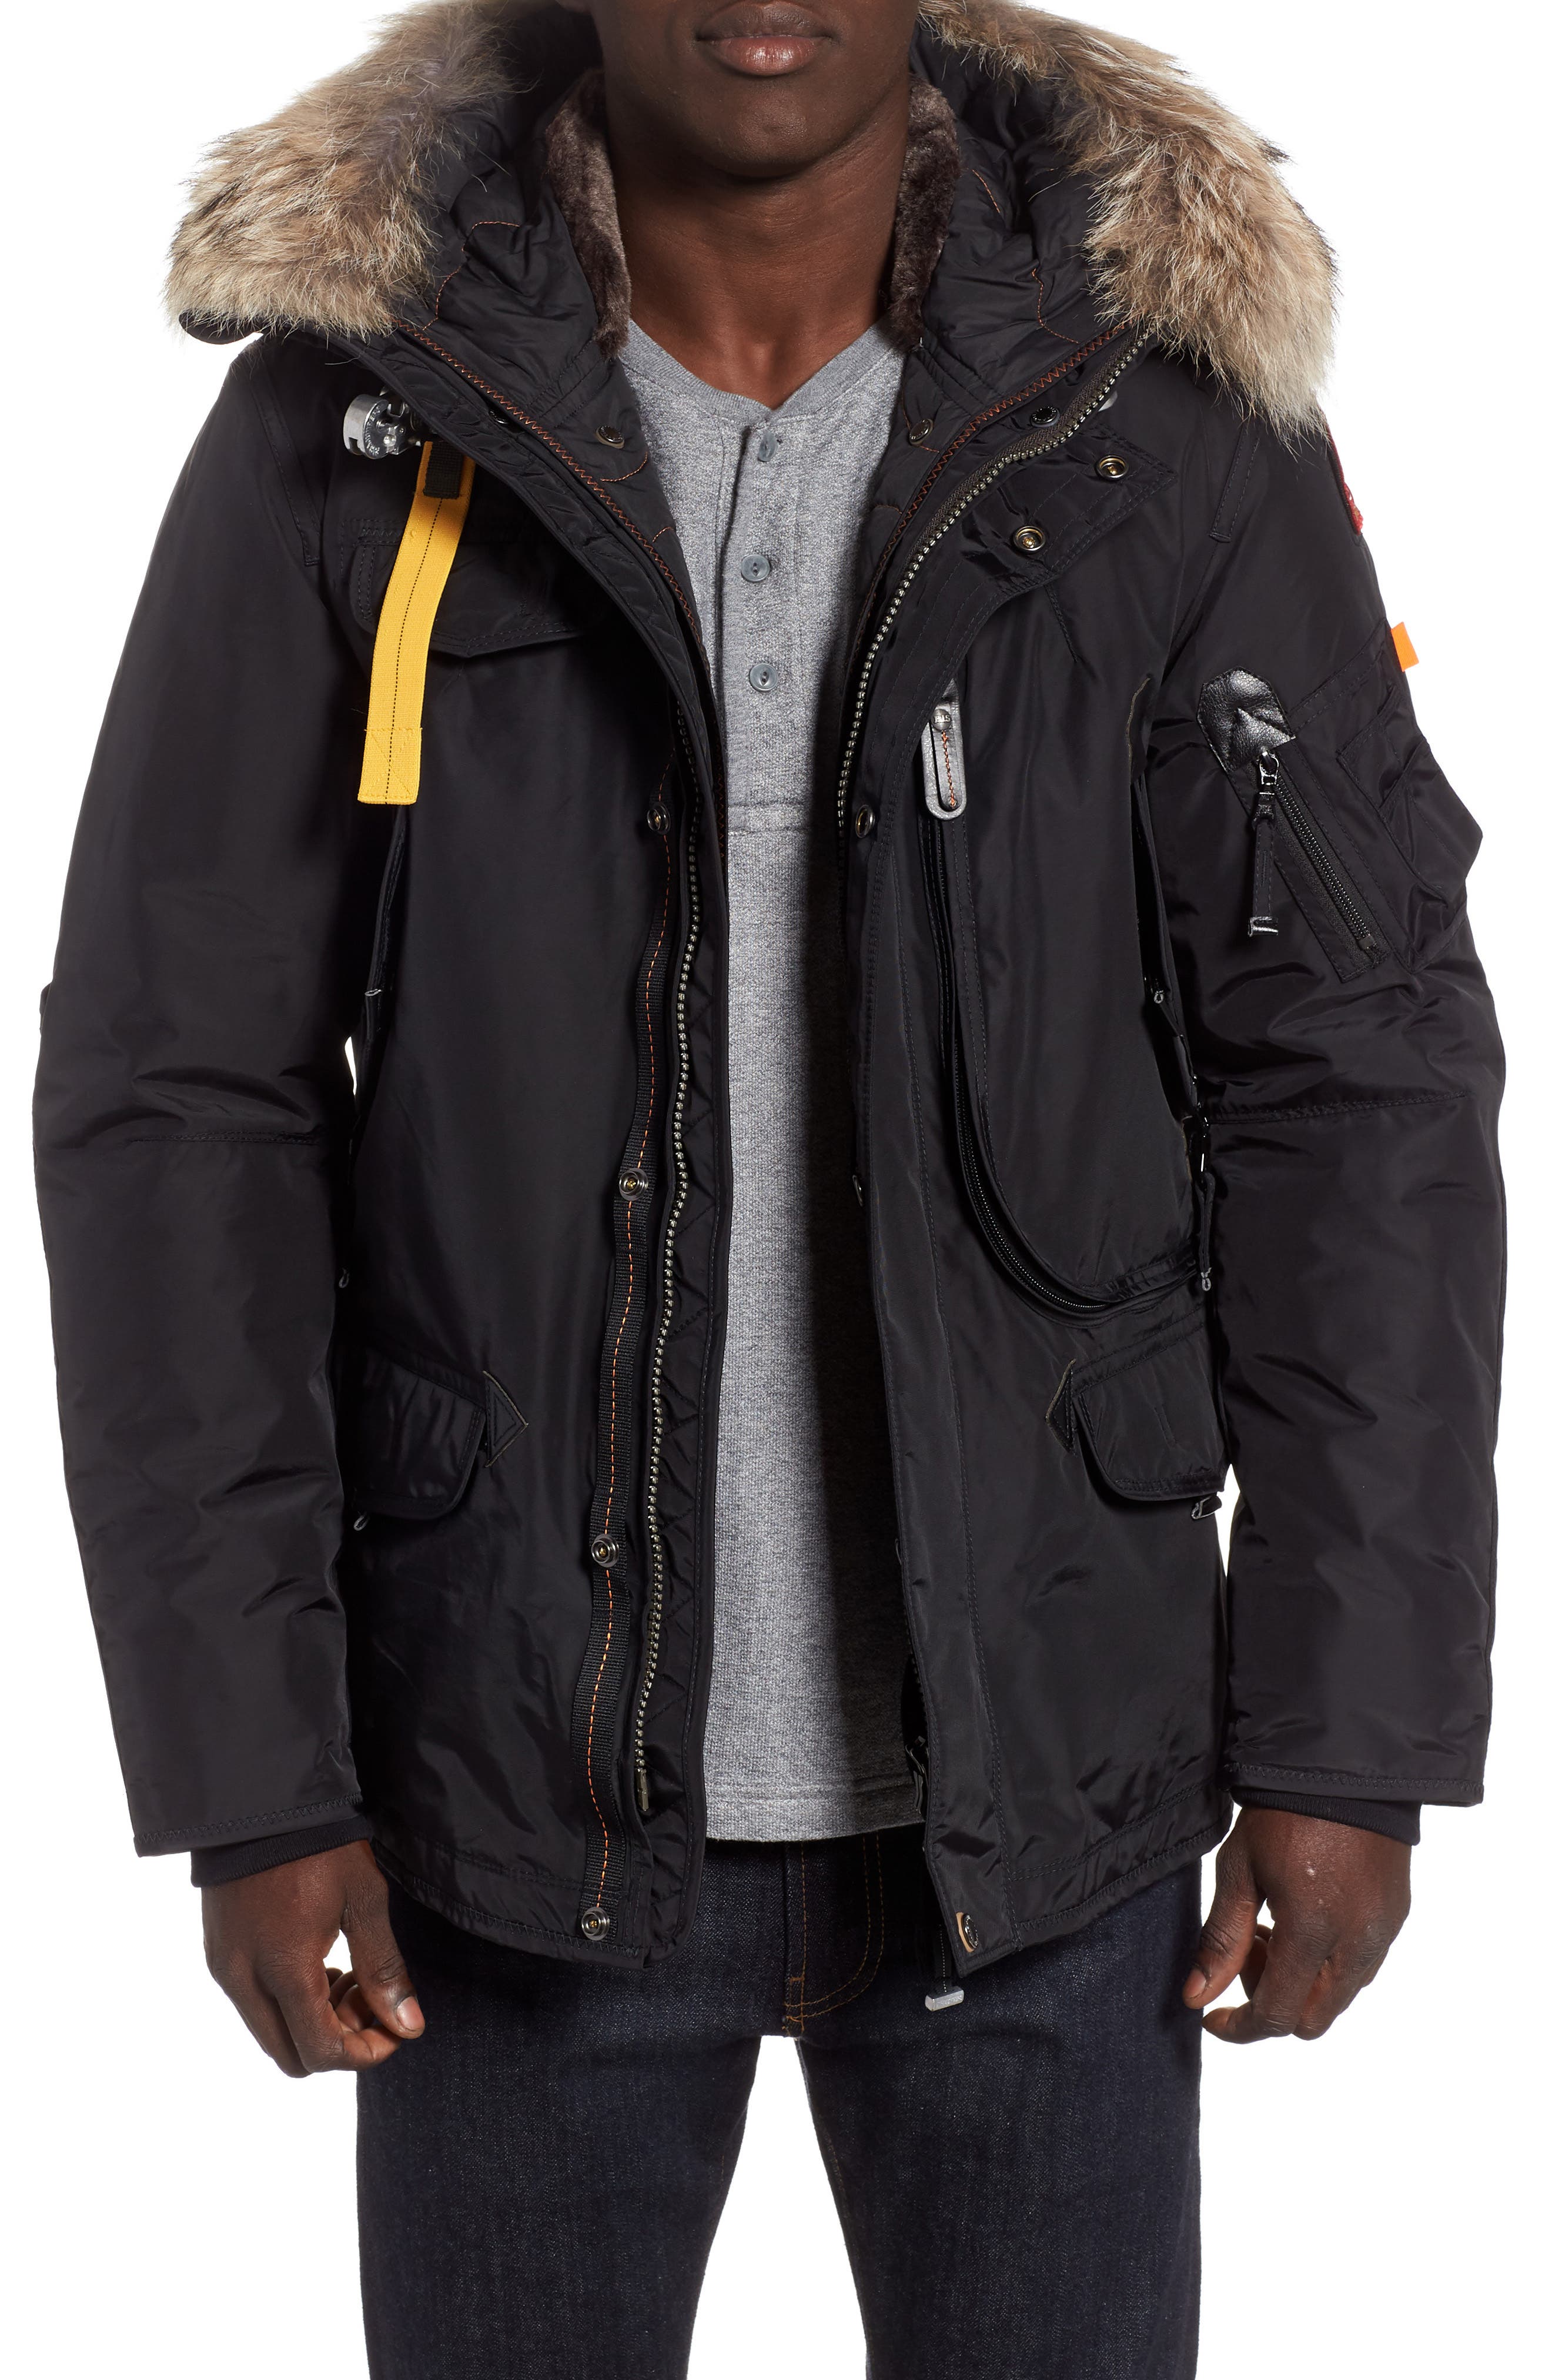 parajumpers right hand jacket men's